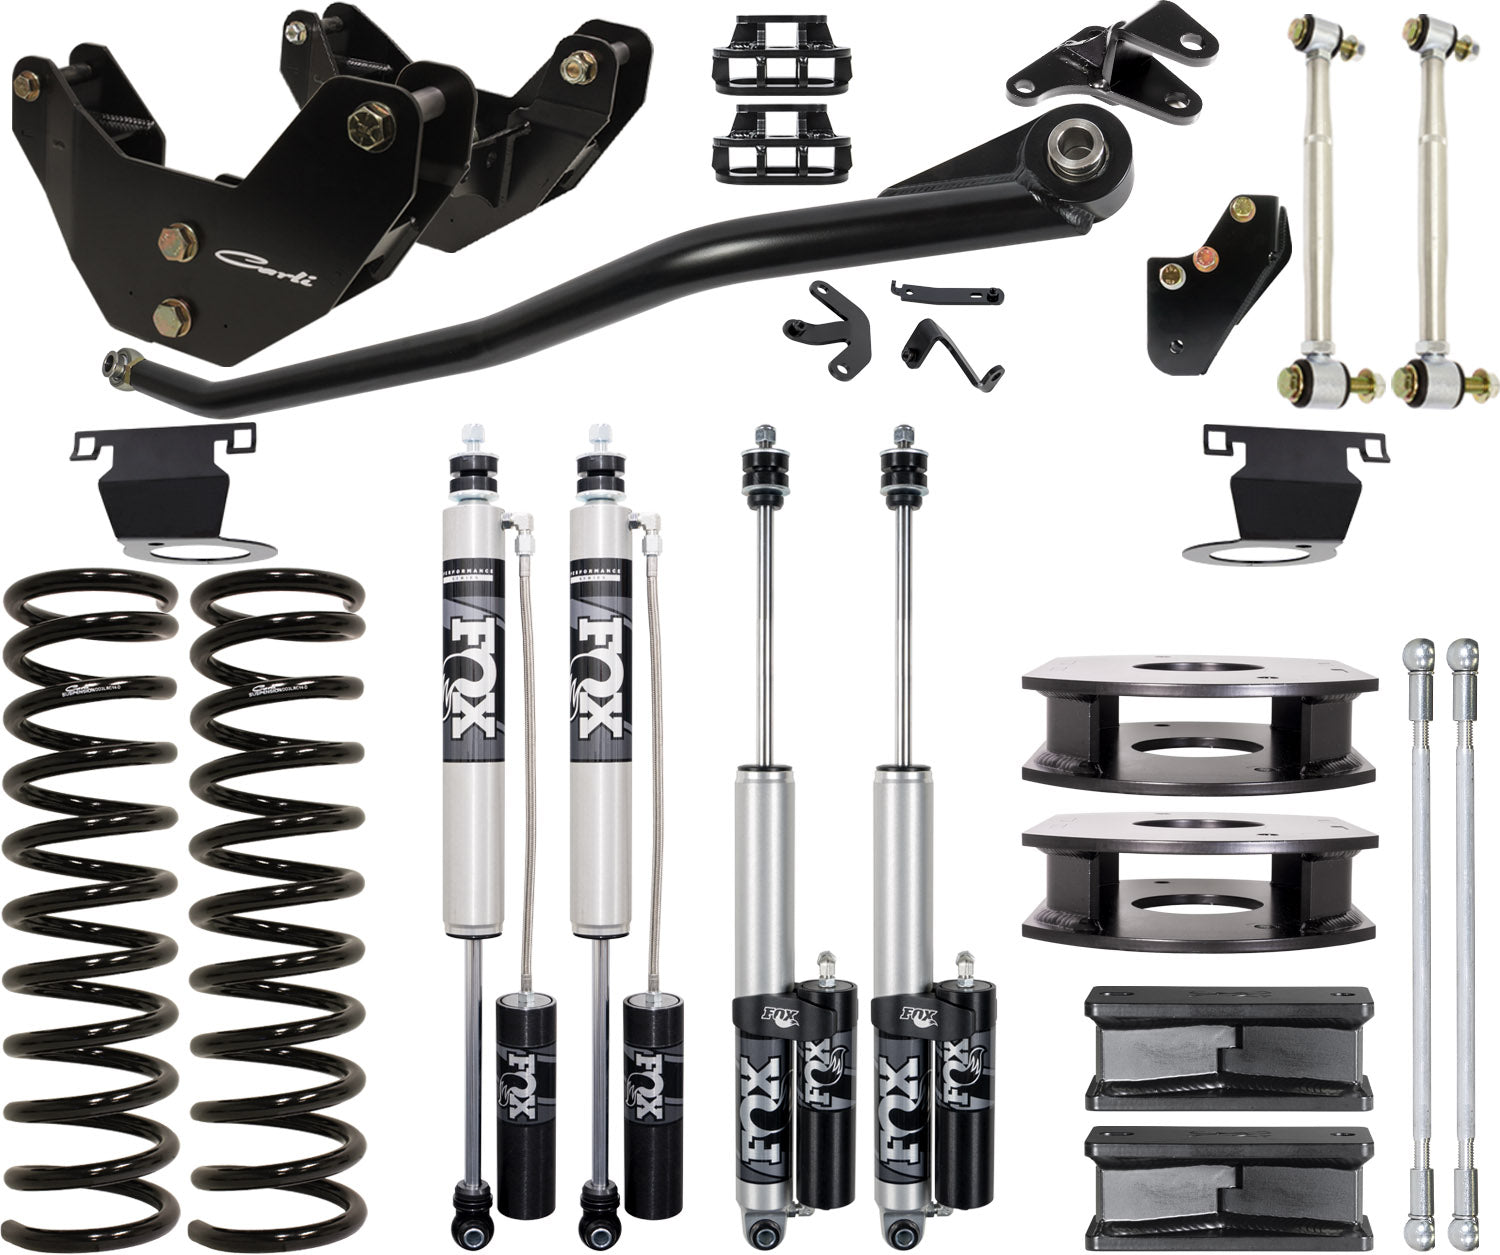 Carli Suspension 3.25" Backcountry Airbag Suspension System